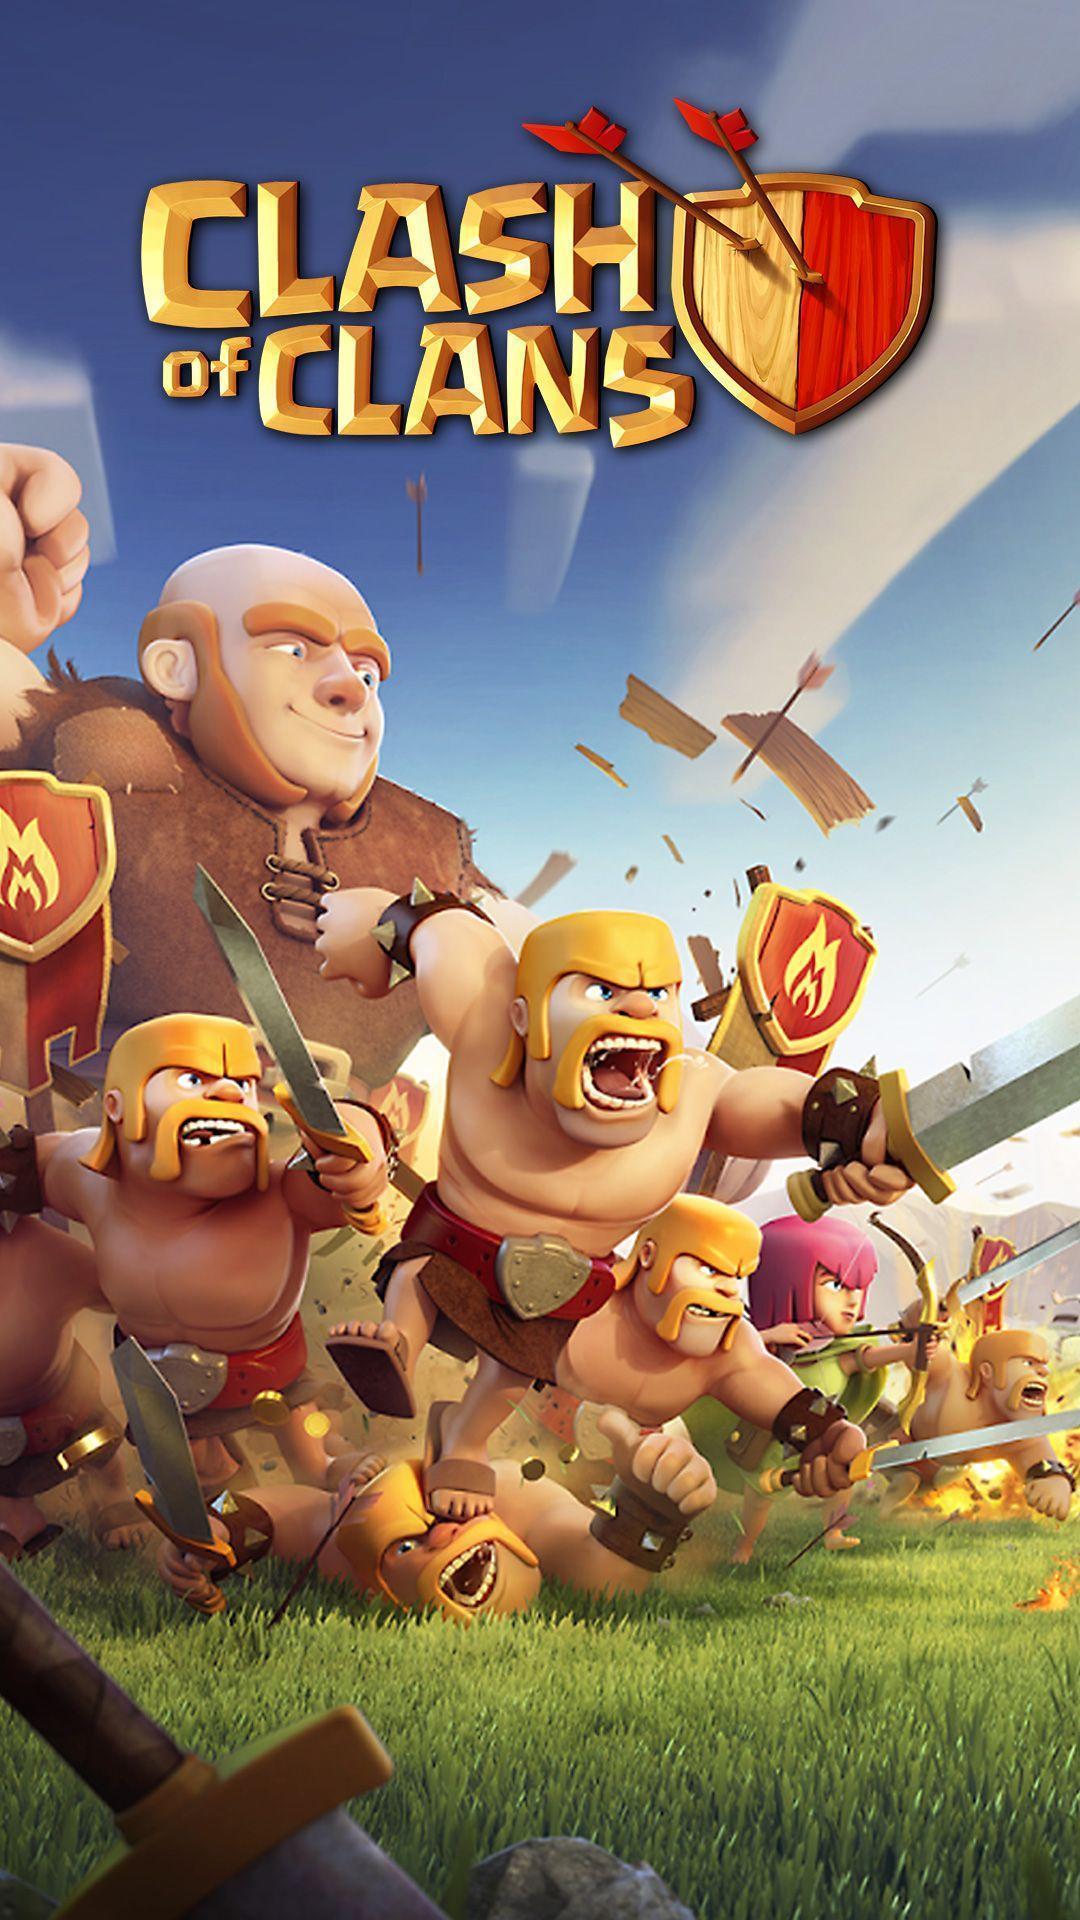 10 Clash of Clans Wallpapers for Clashers! | Clash for Dummies